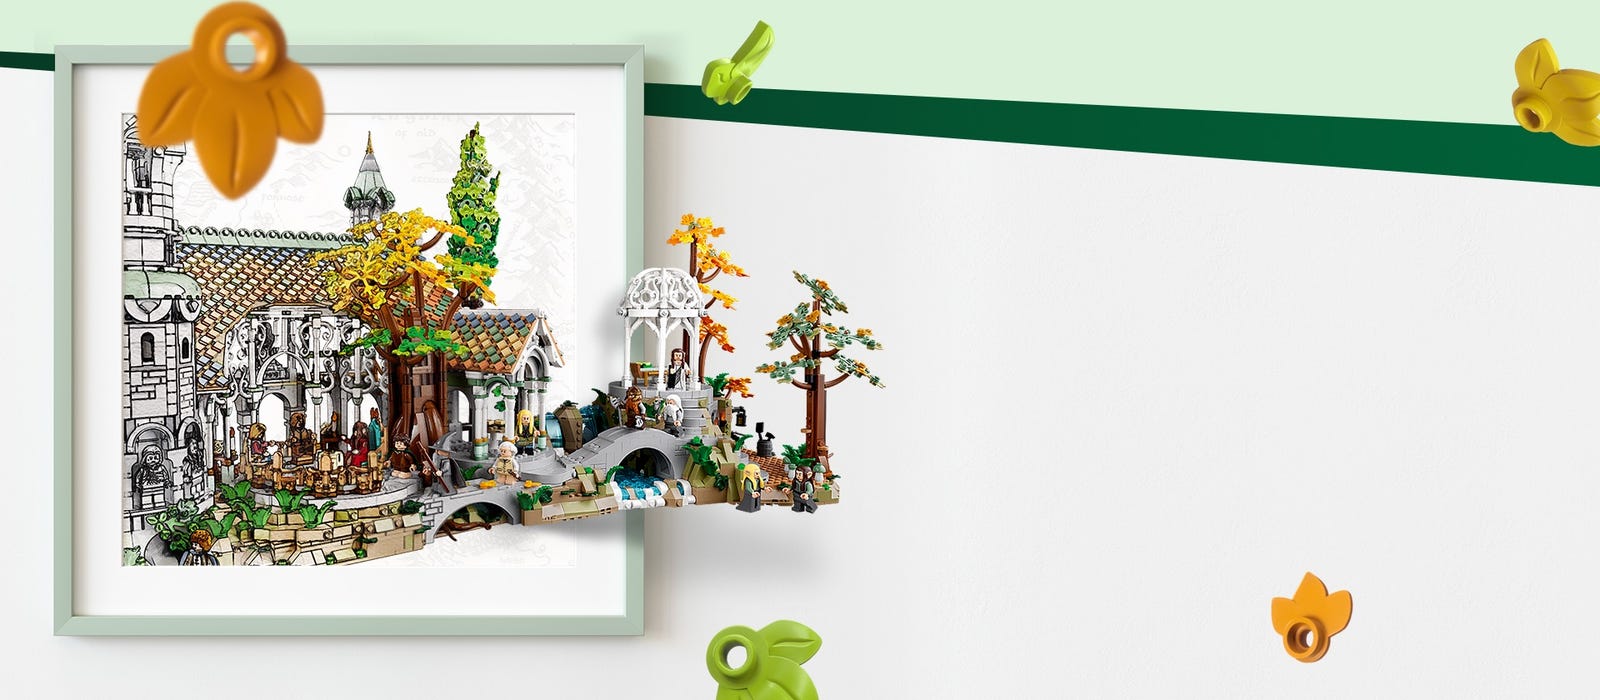 The Top 10 Biggest LEGO® sets ever